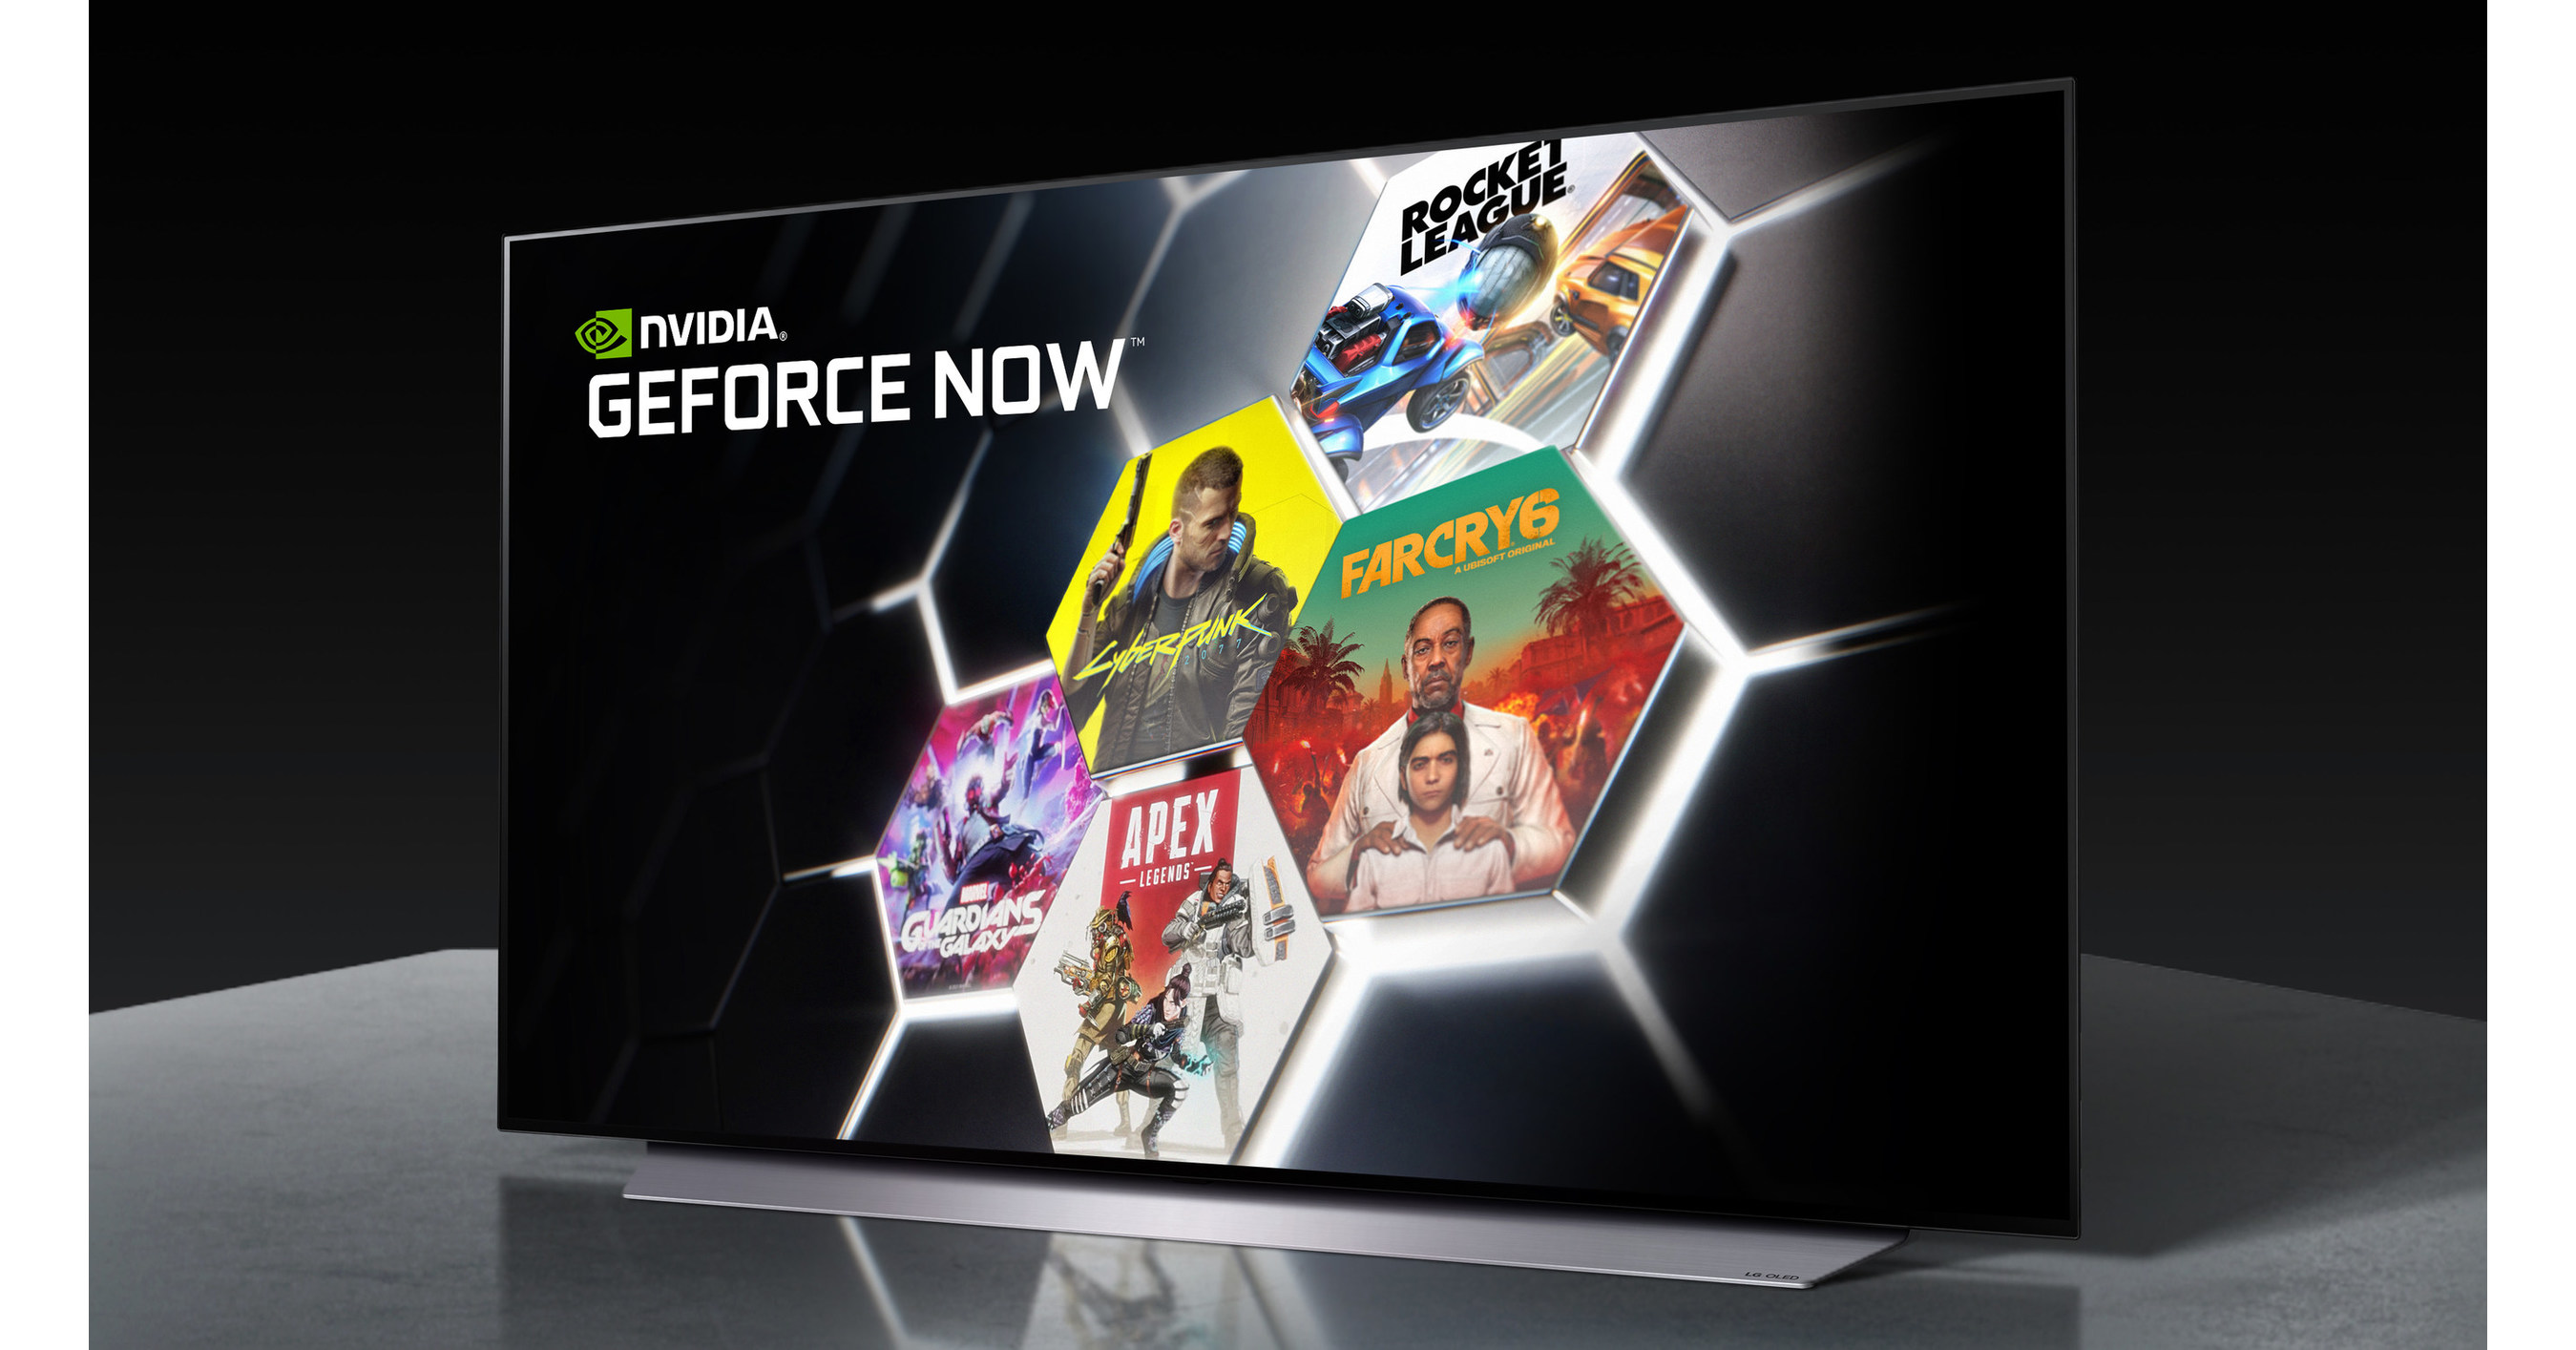 How to Play NVIDIA GeForce NOW Games on a Samsung TV without a PC 